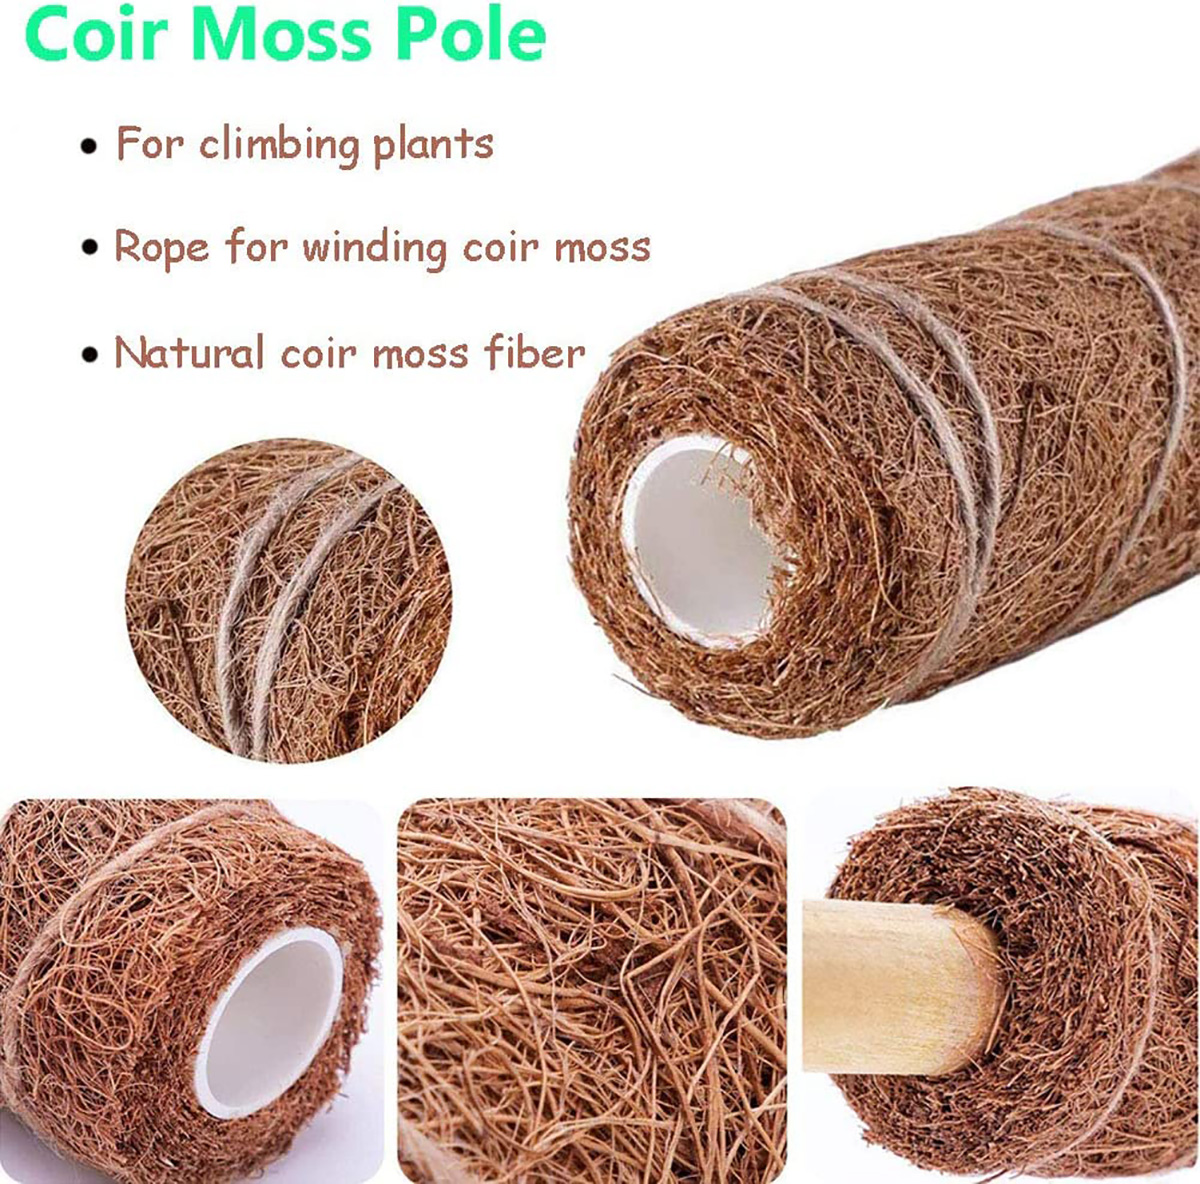 4-Pack-Coir-Totem-Pole-Plant-Coir-Moss-Stick-Totem-Pole-for-Climmbing-Plant-Support-Extension-Climbi-1824346-2